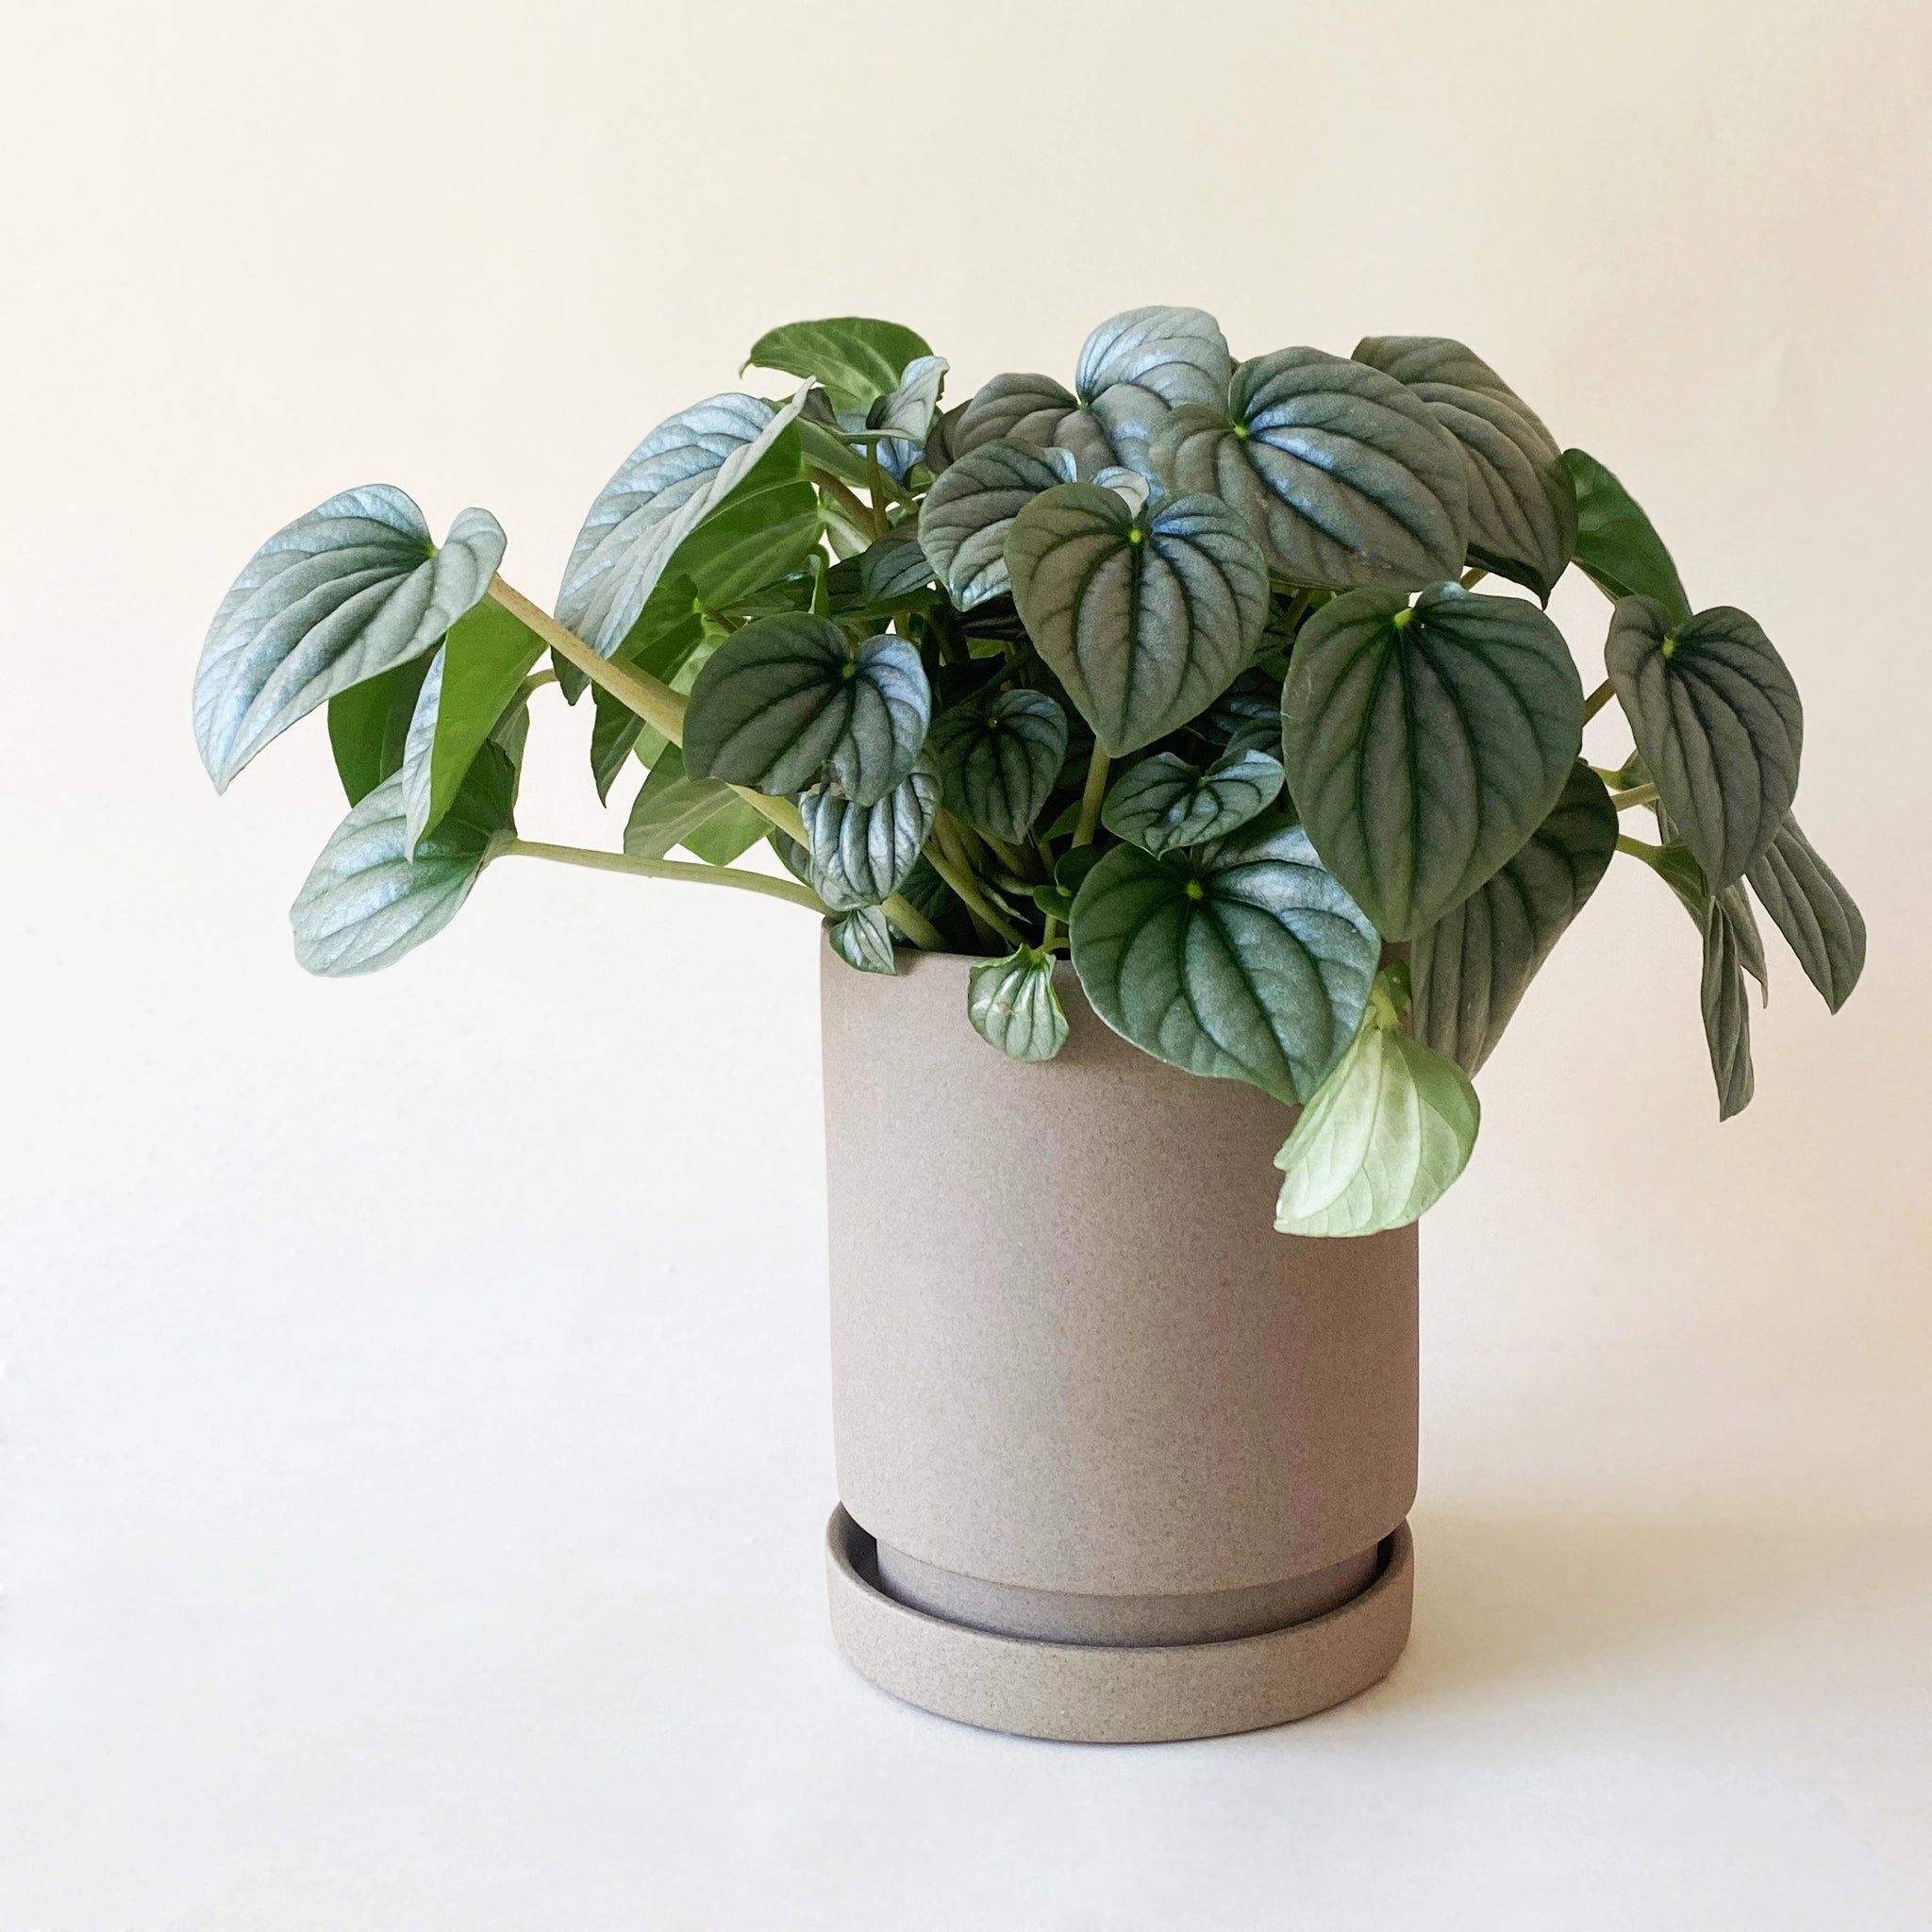 A light brown clay planter with a removable drainage tray and a pepperomia plant inside. Plant not included with purchase.